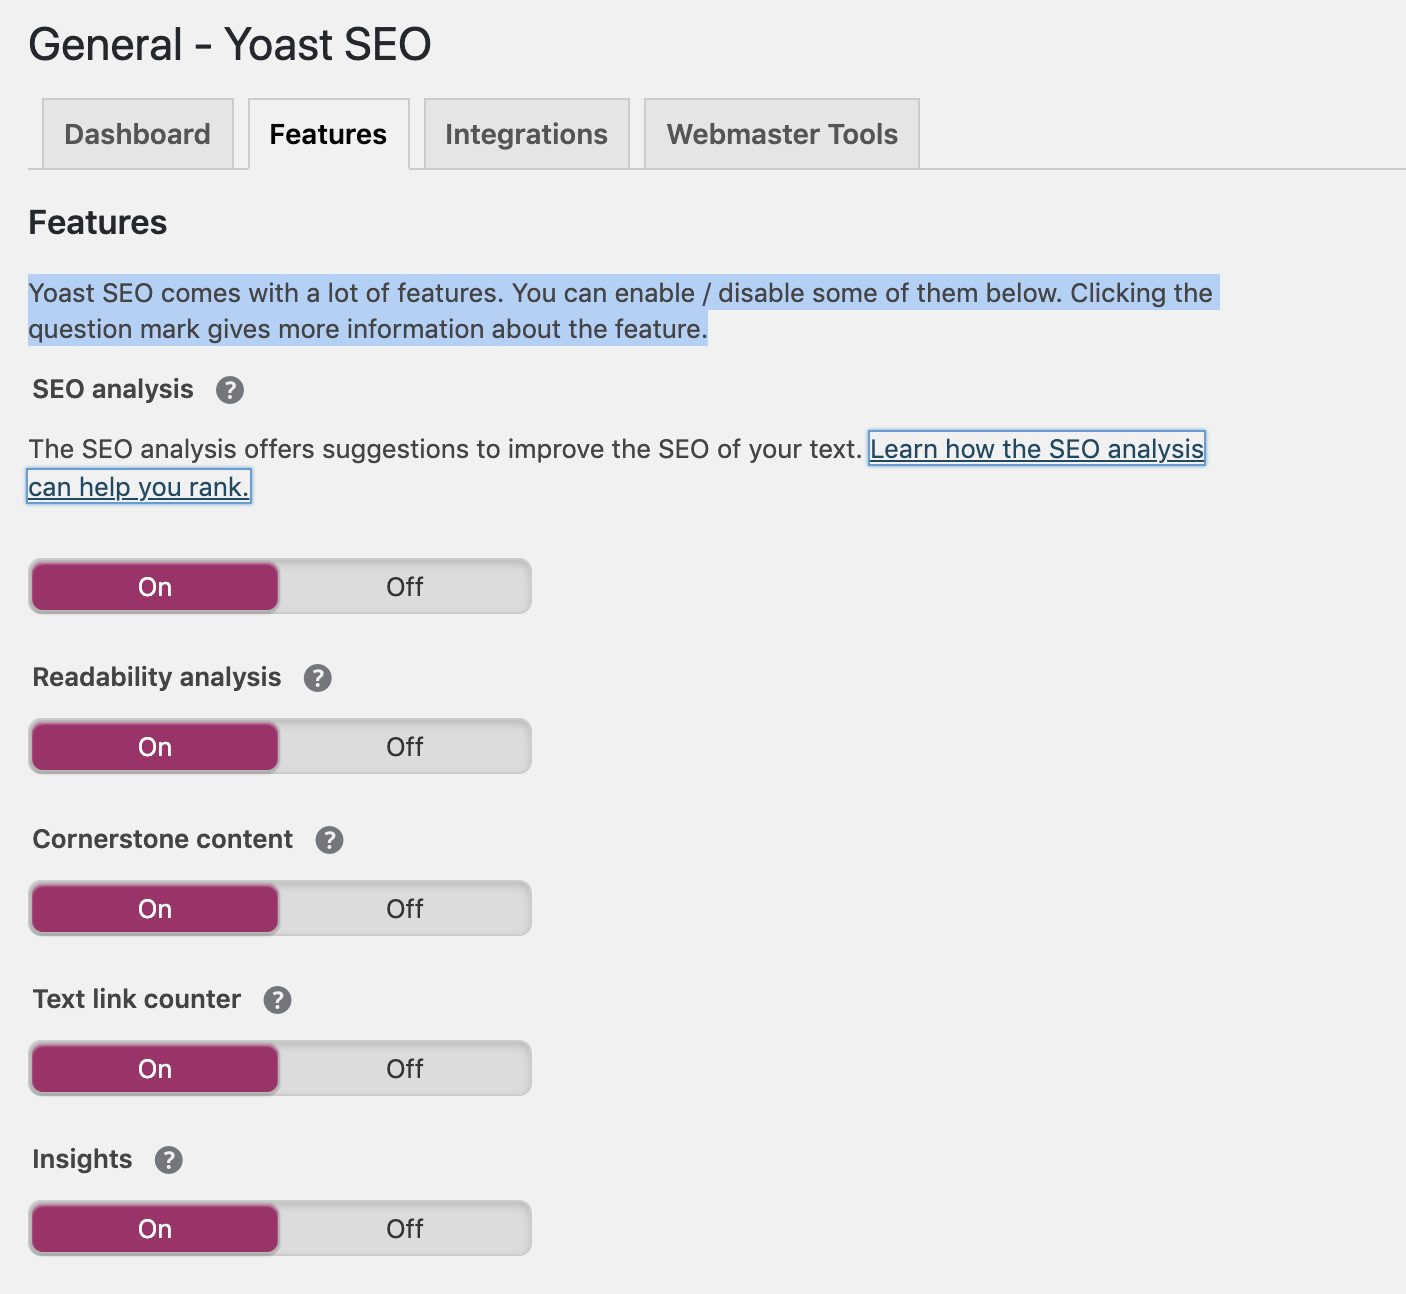 Yoast SEO comes with a many options to help with optimizing your site. There is a toggle option that allows you to turn certain features on or off. To get help, click the question mark next to the feature.  